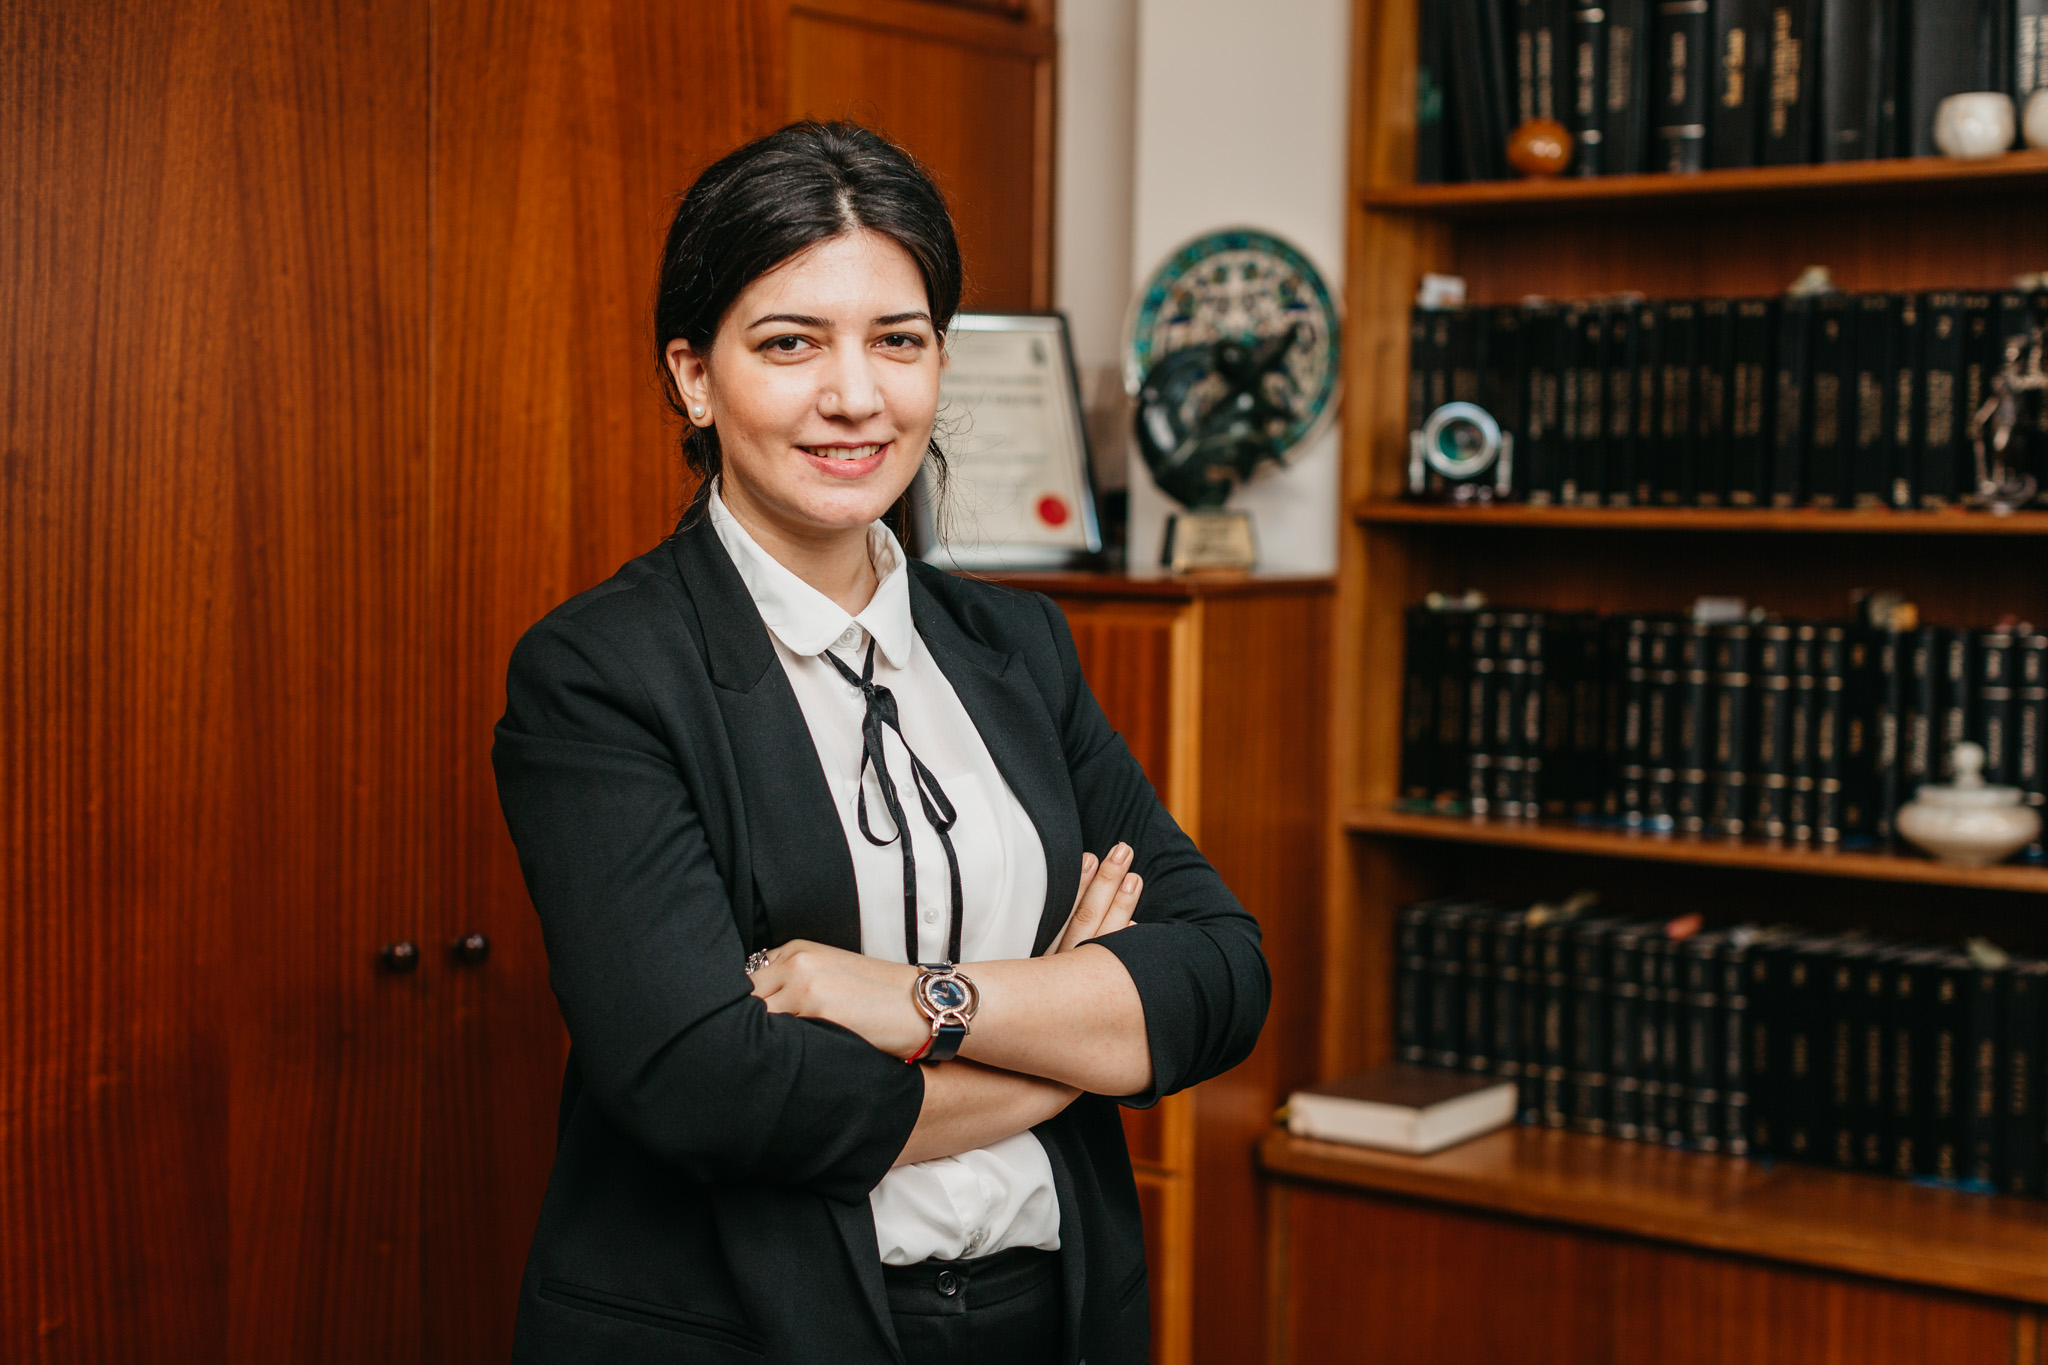 Günperi Şişman is an IP and corporate lawyer in Northern Cyprus. She deals with trademark registration, intelectual property disputes